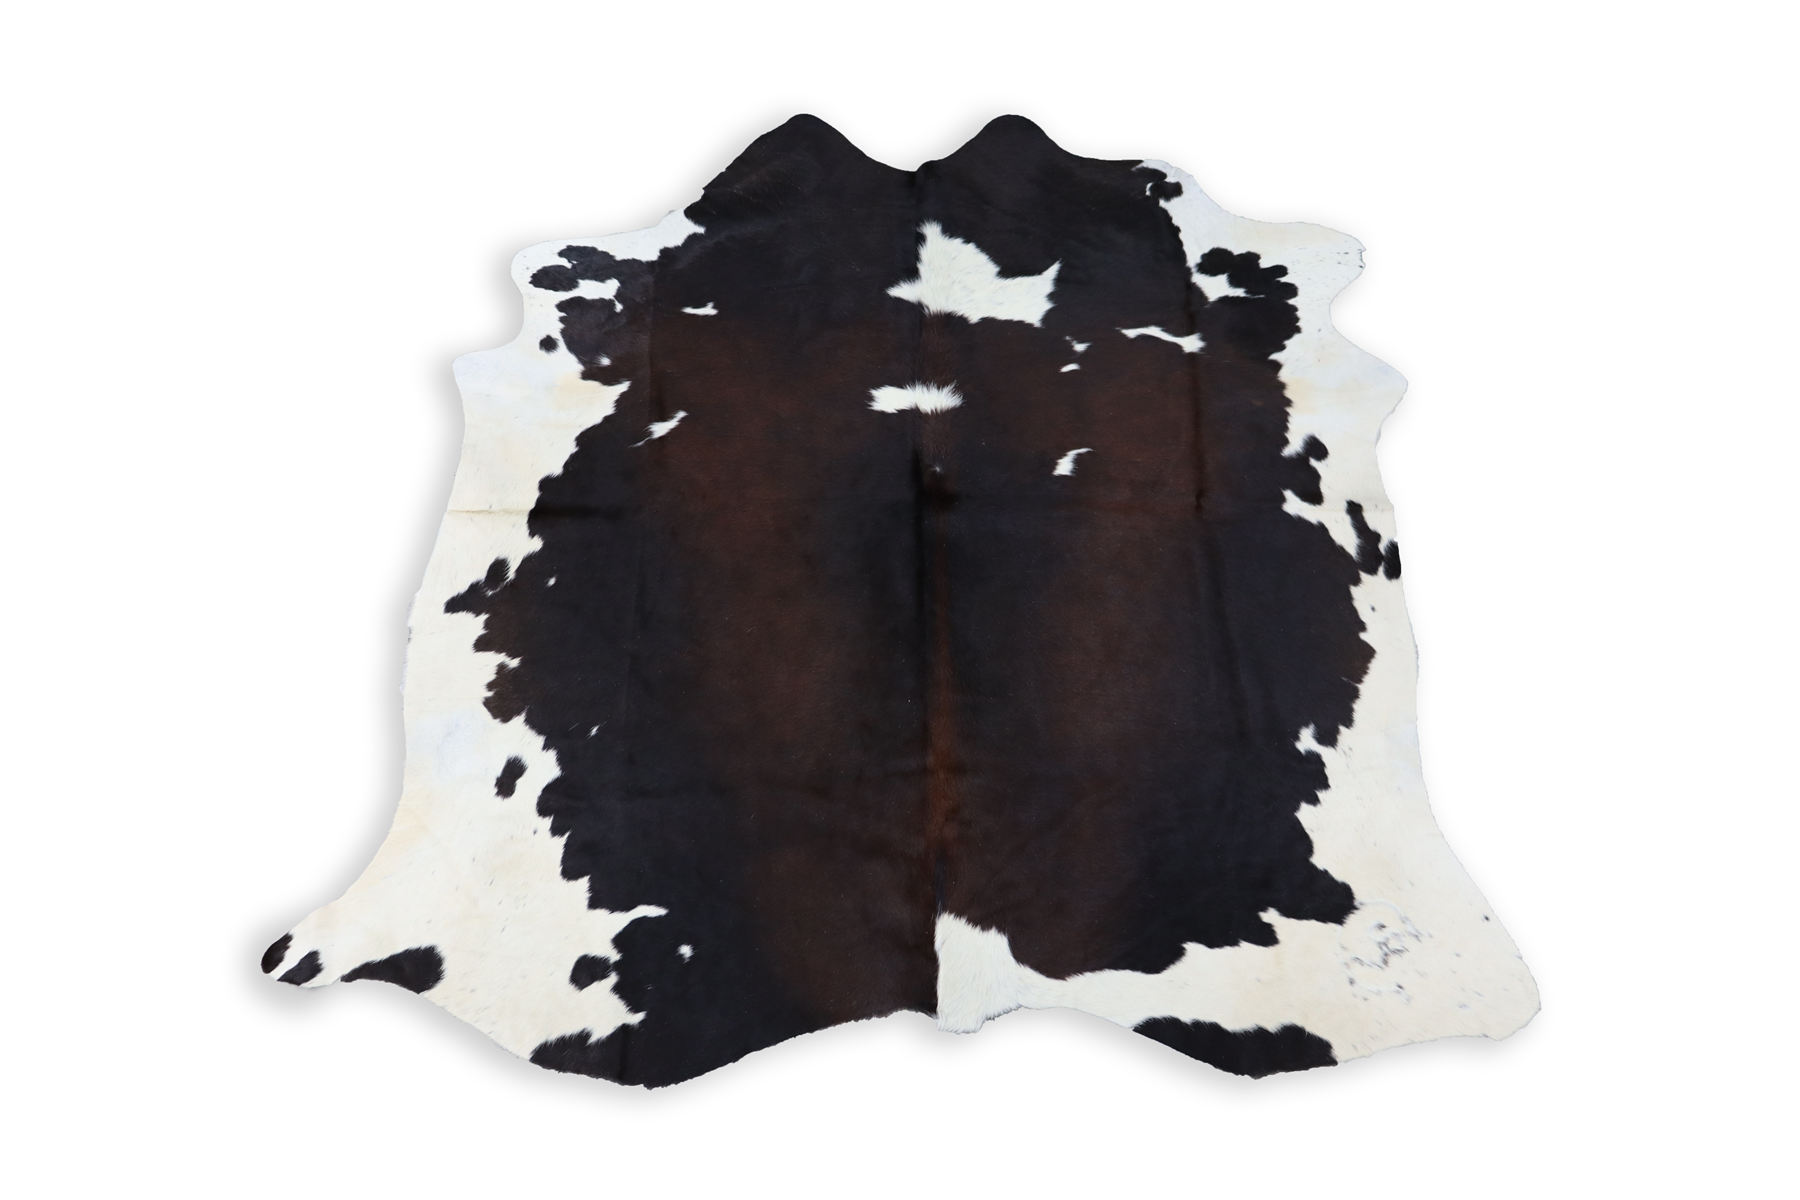 Tricolor (6.2 X 5.9 ft.) Exact As Photo BRAZILIAN Cowhide Rug | 100% Natural Cowhide Area Rug | Real Leather Cow Skin Rug | BZ341